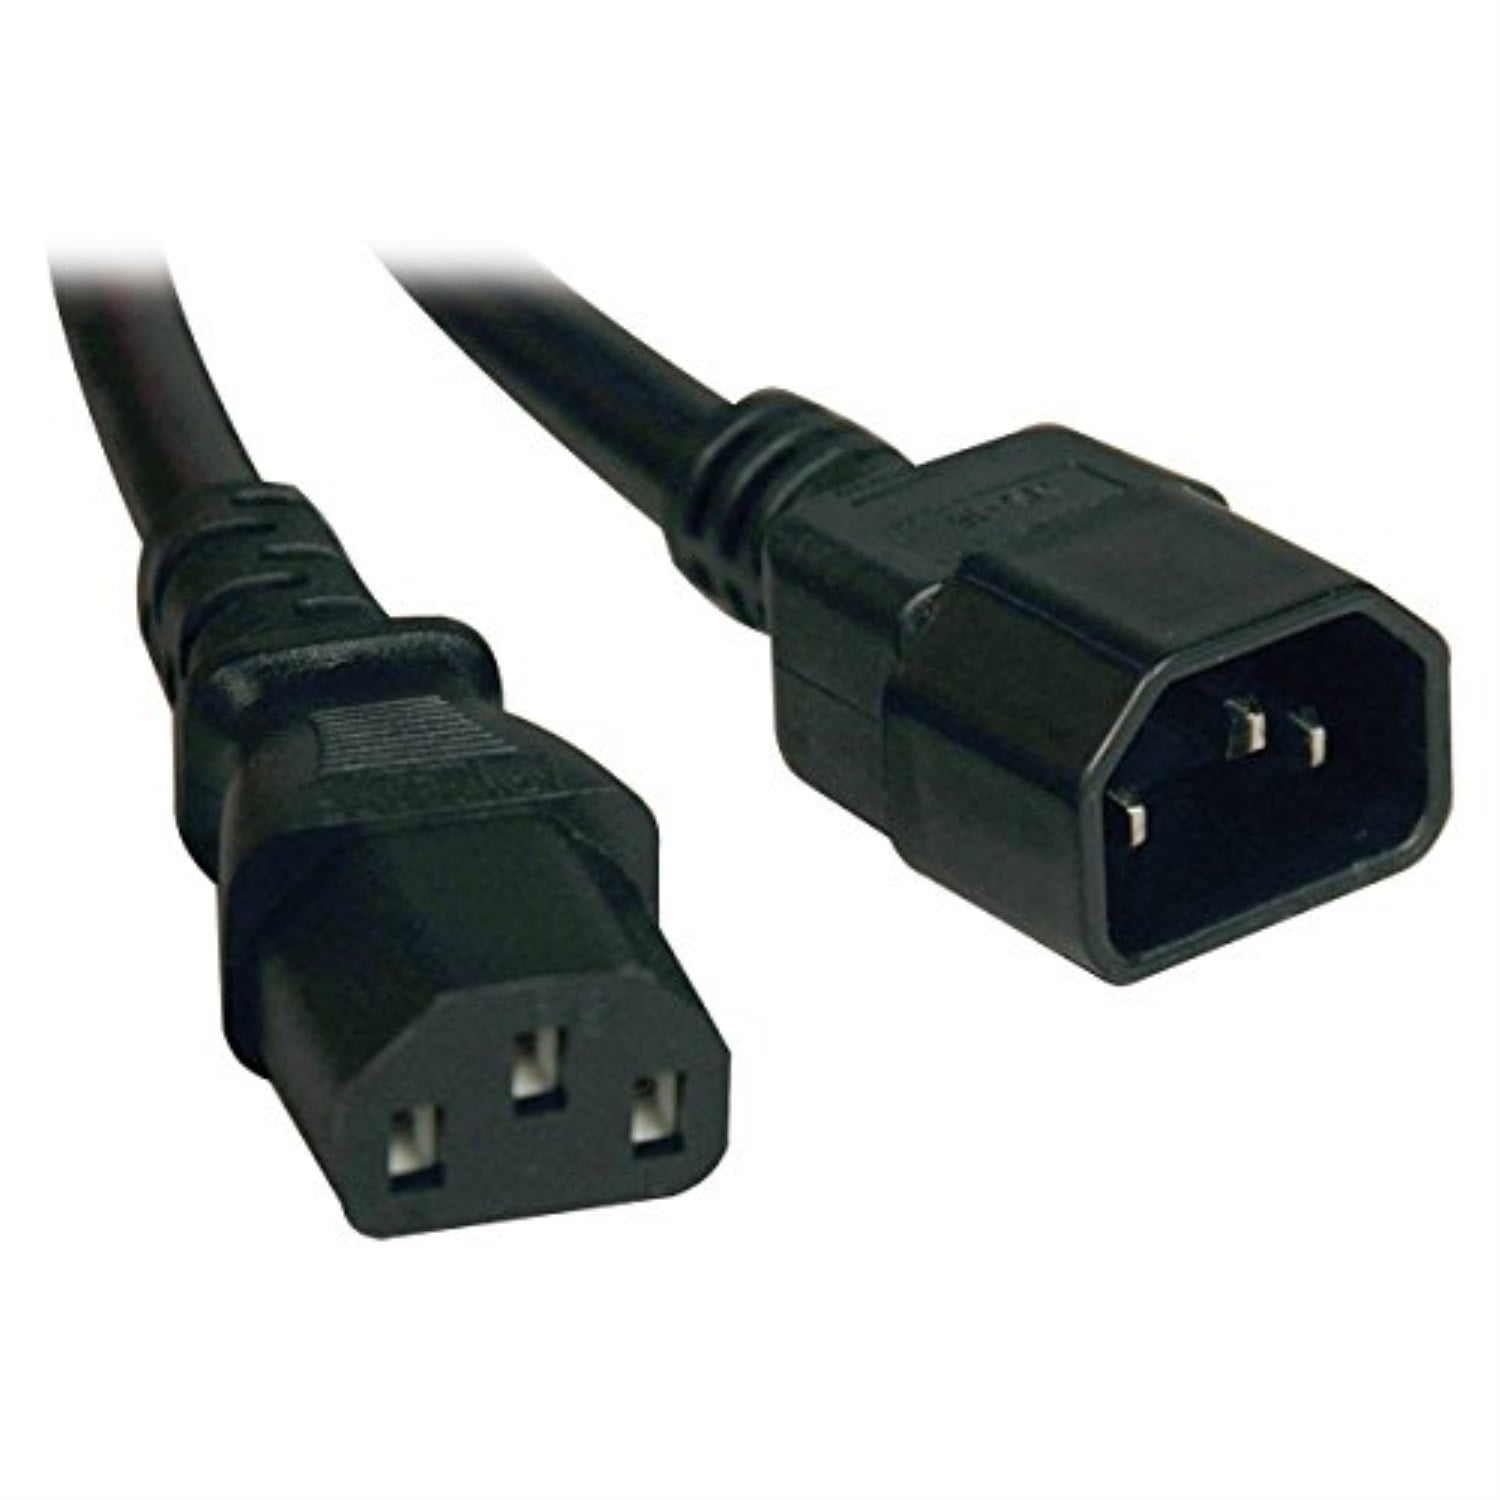 Computer Power Extension Cord 13a 16awg 6-Ft. Iec-320-C14 to Iec-320-C13